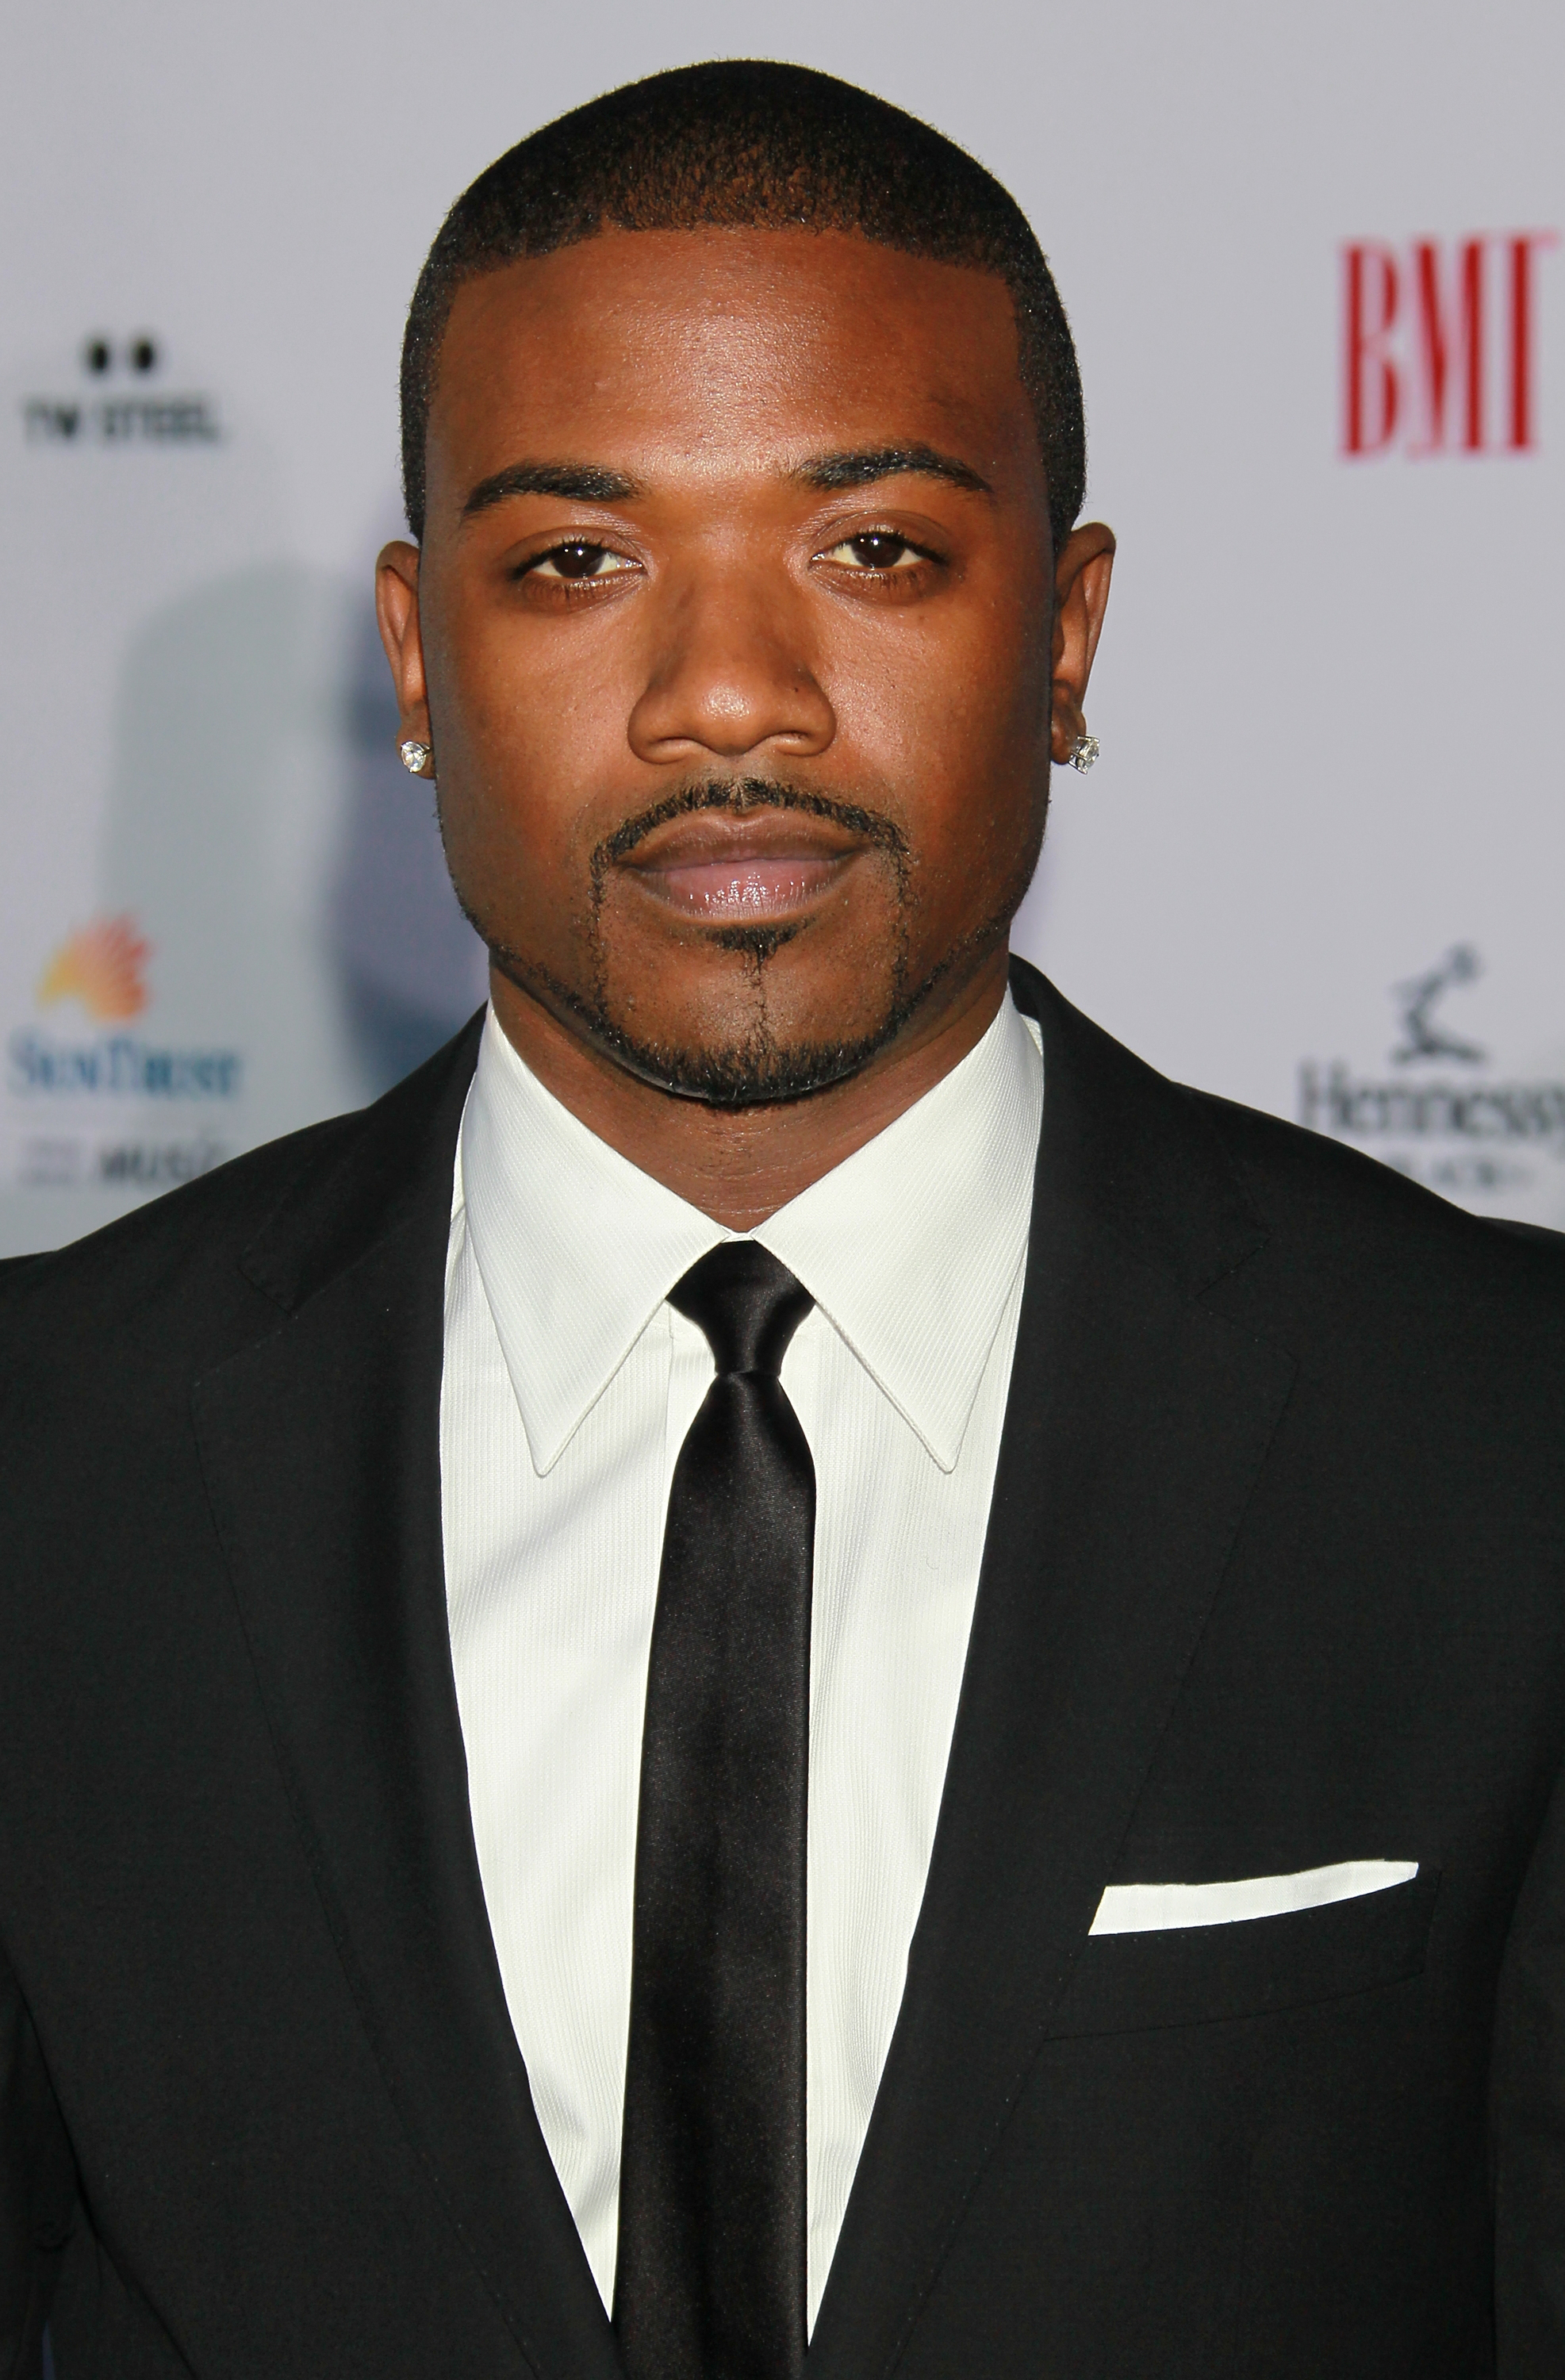 charl francois marais recommends images of ray j pic